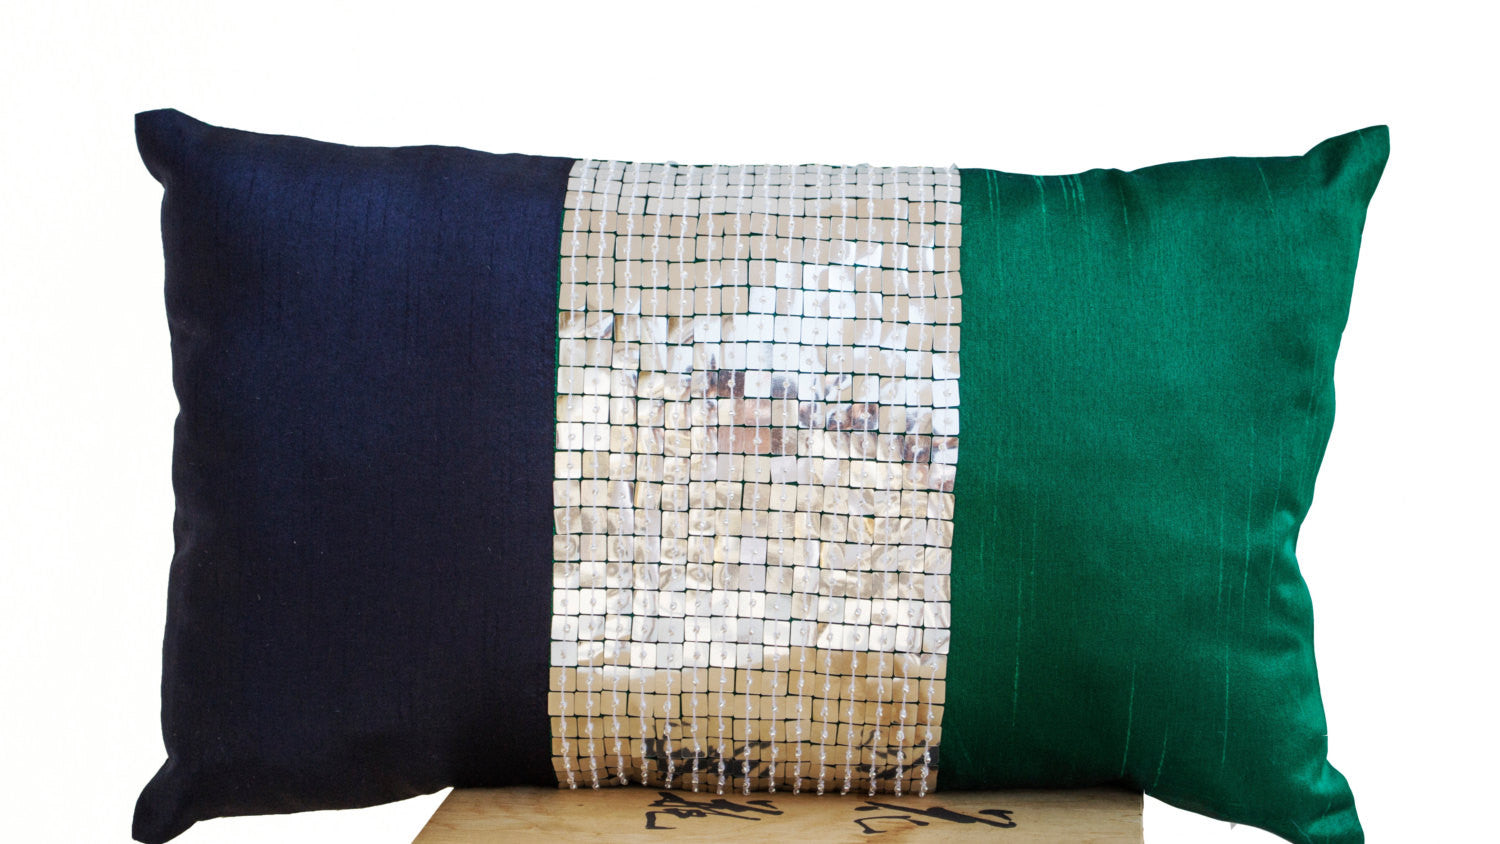 Handmade throw pillows with multiple colored silk sequin